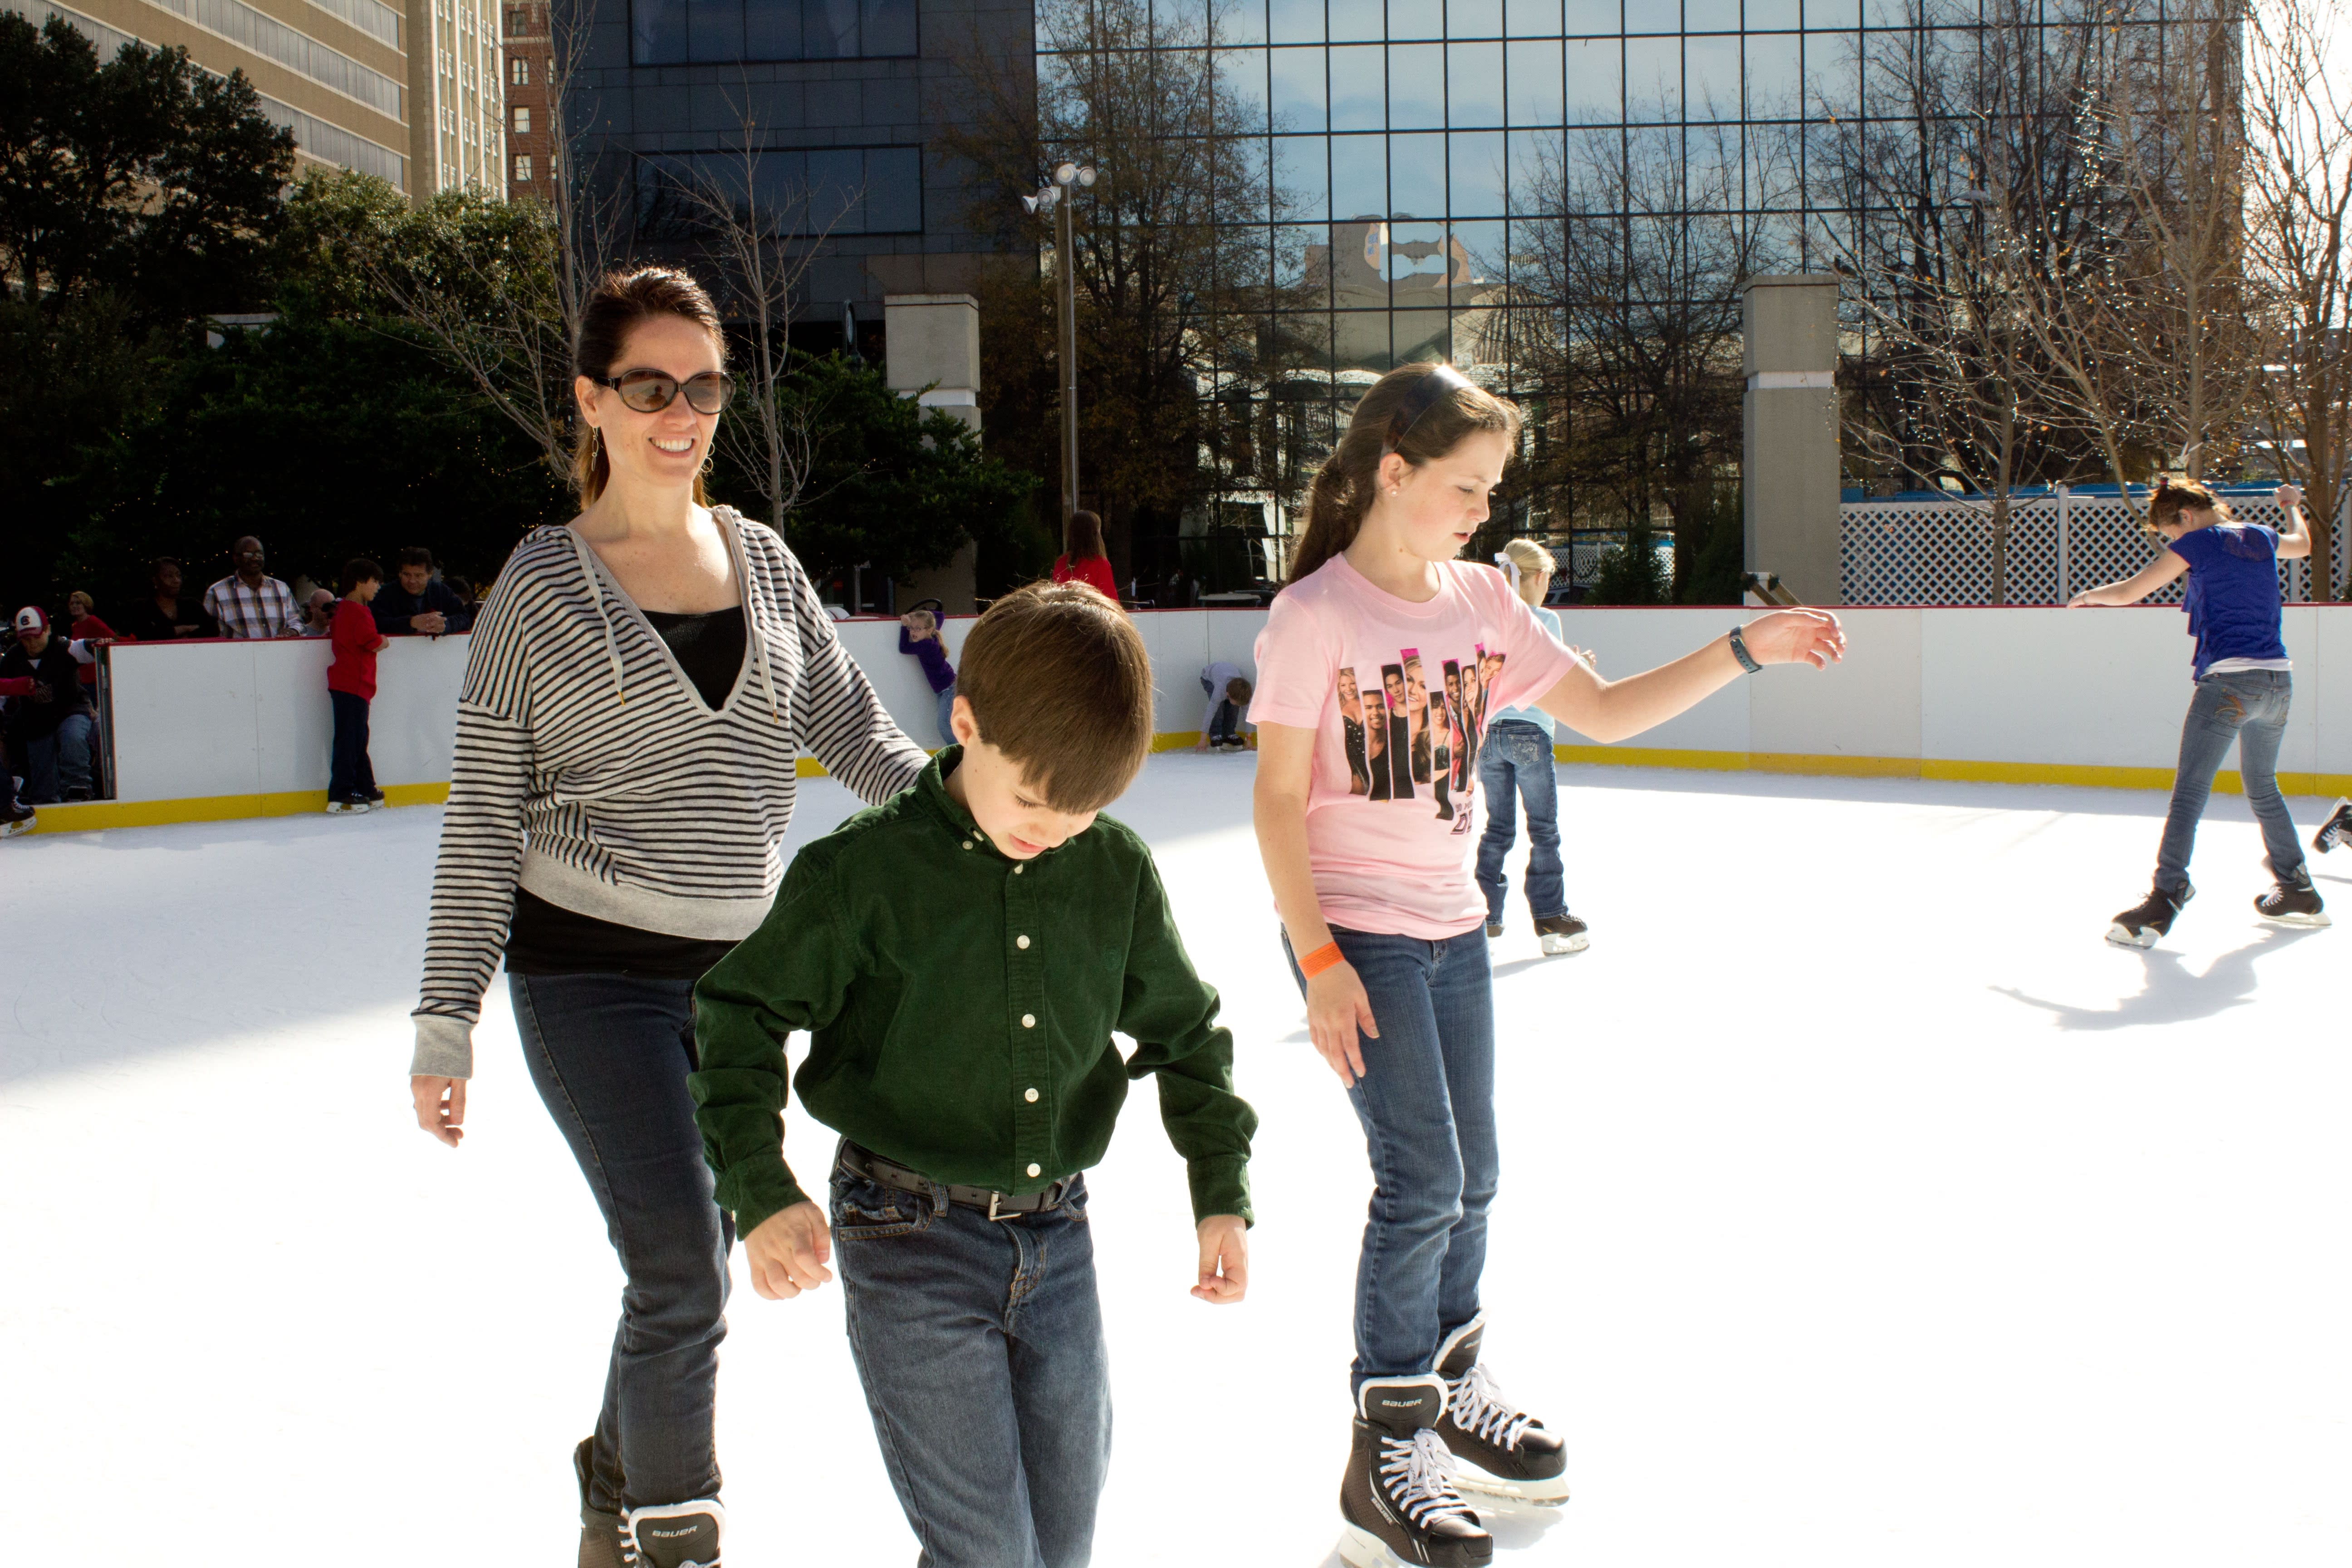 Outdoor skating at Main Street Ice on Boyd Plaza in Columbia, SC